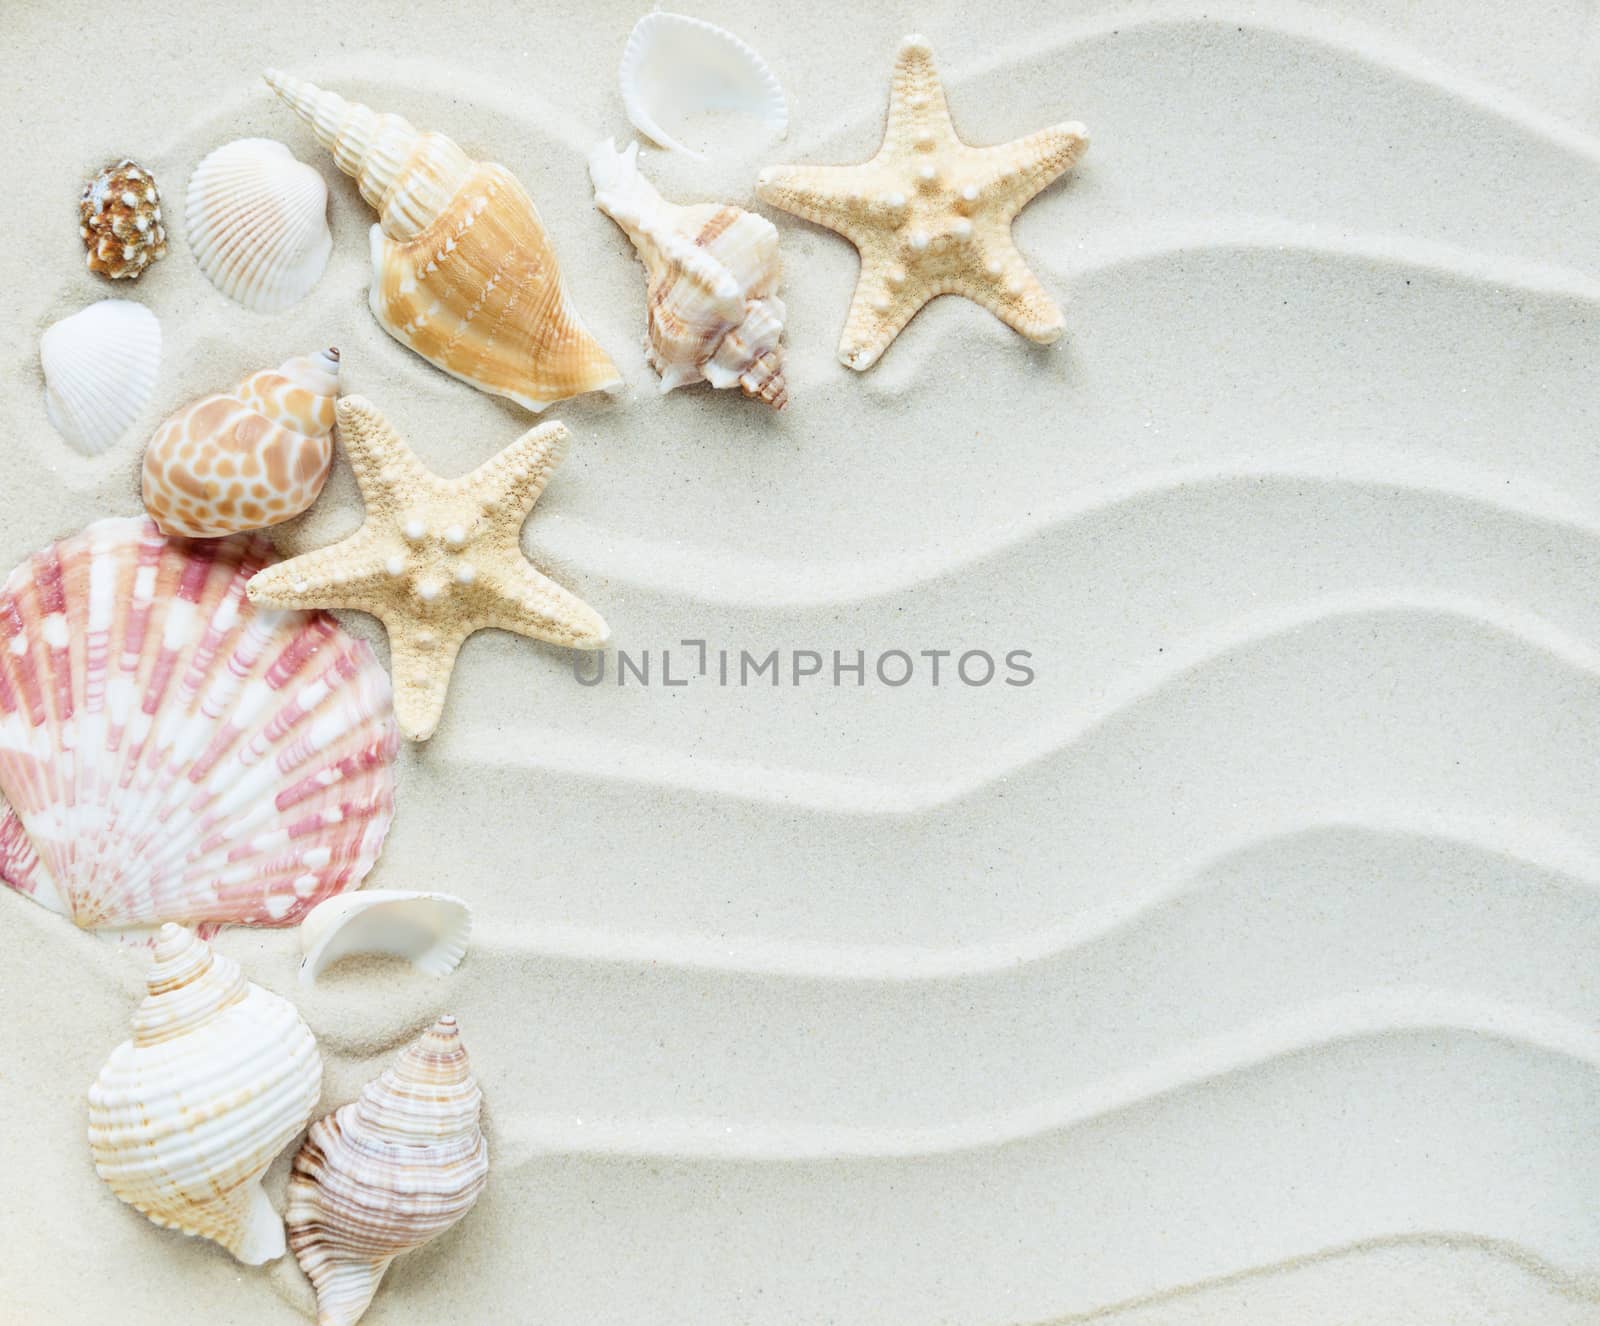 Clams and starfishes on thesea sand by Epitavi